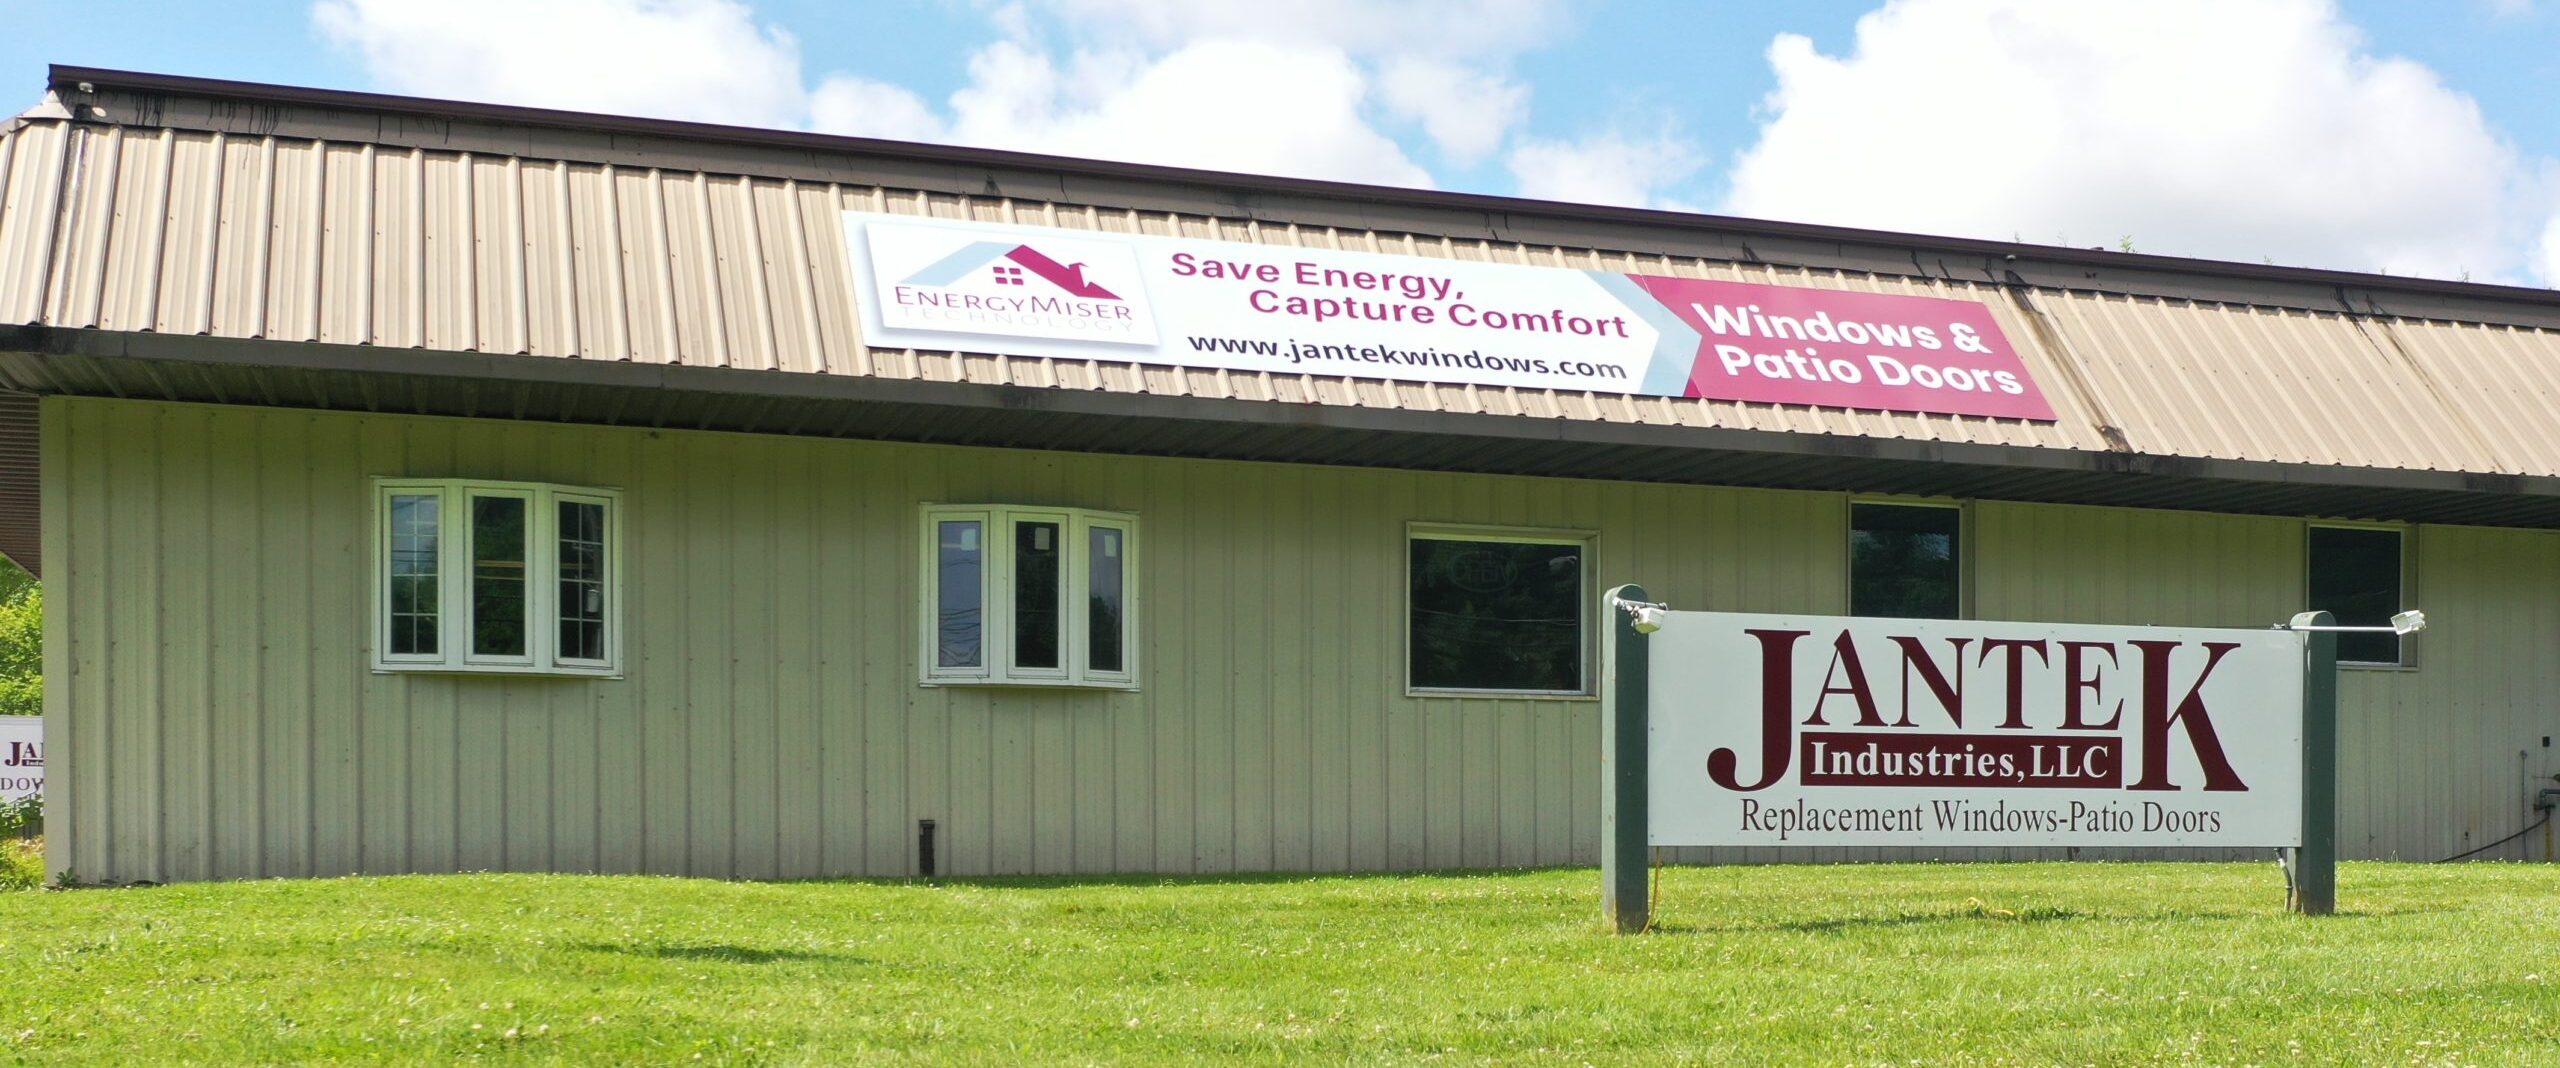 Exterior view of Jantek Industries signs at the factory & showroom